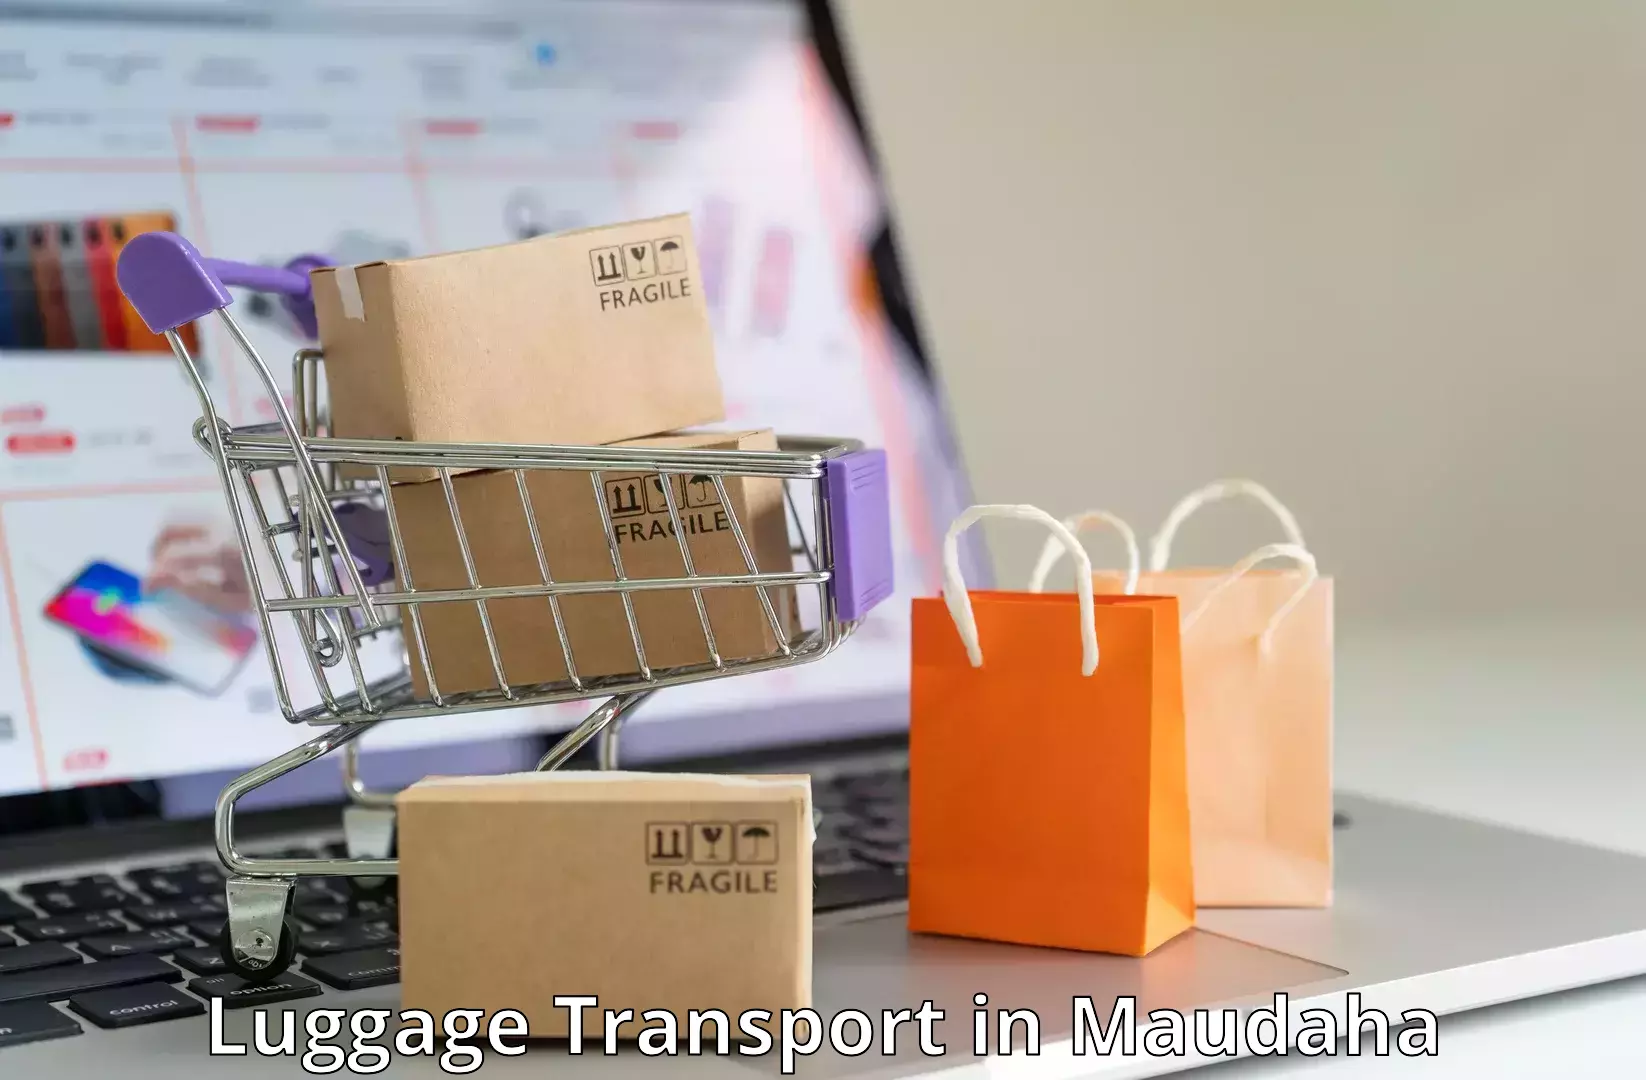 Luggage delivery operations in Maudaha